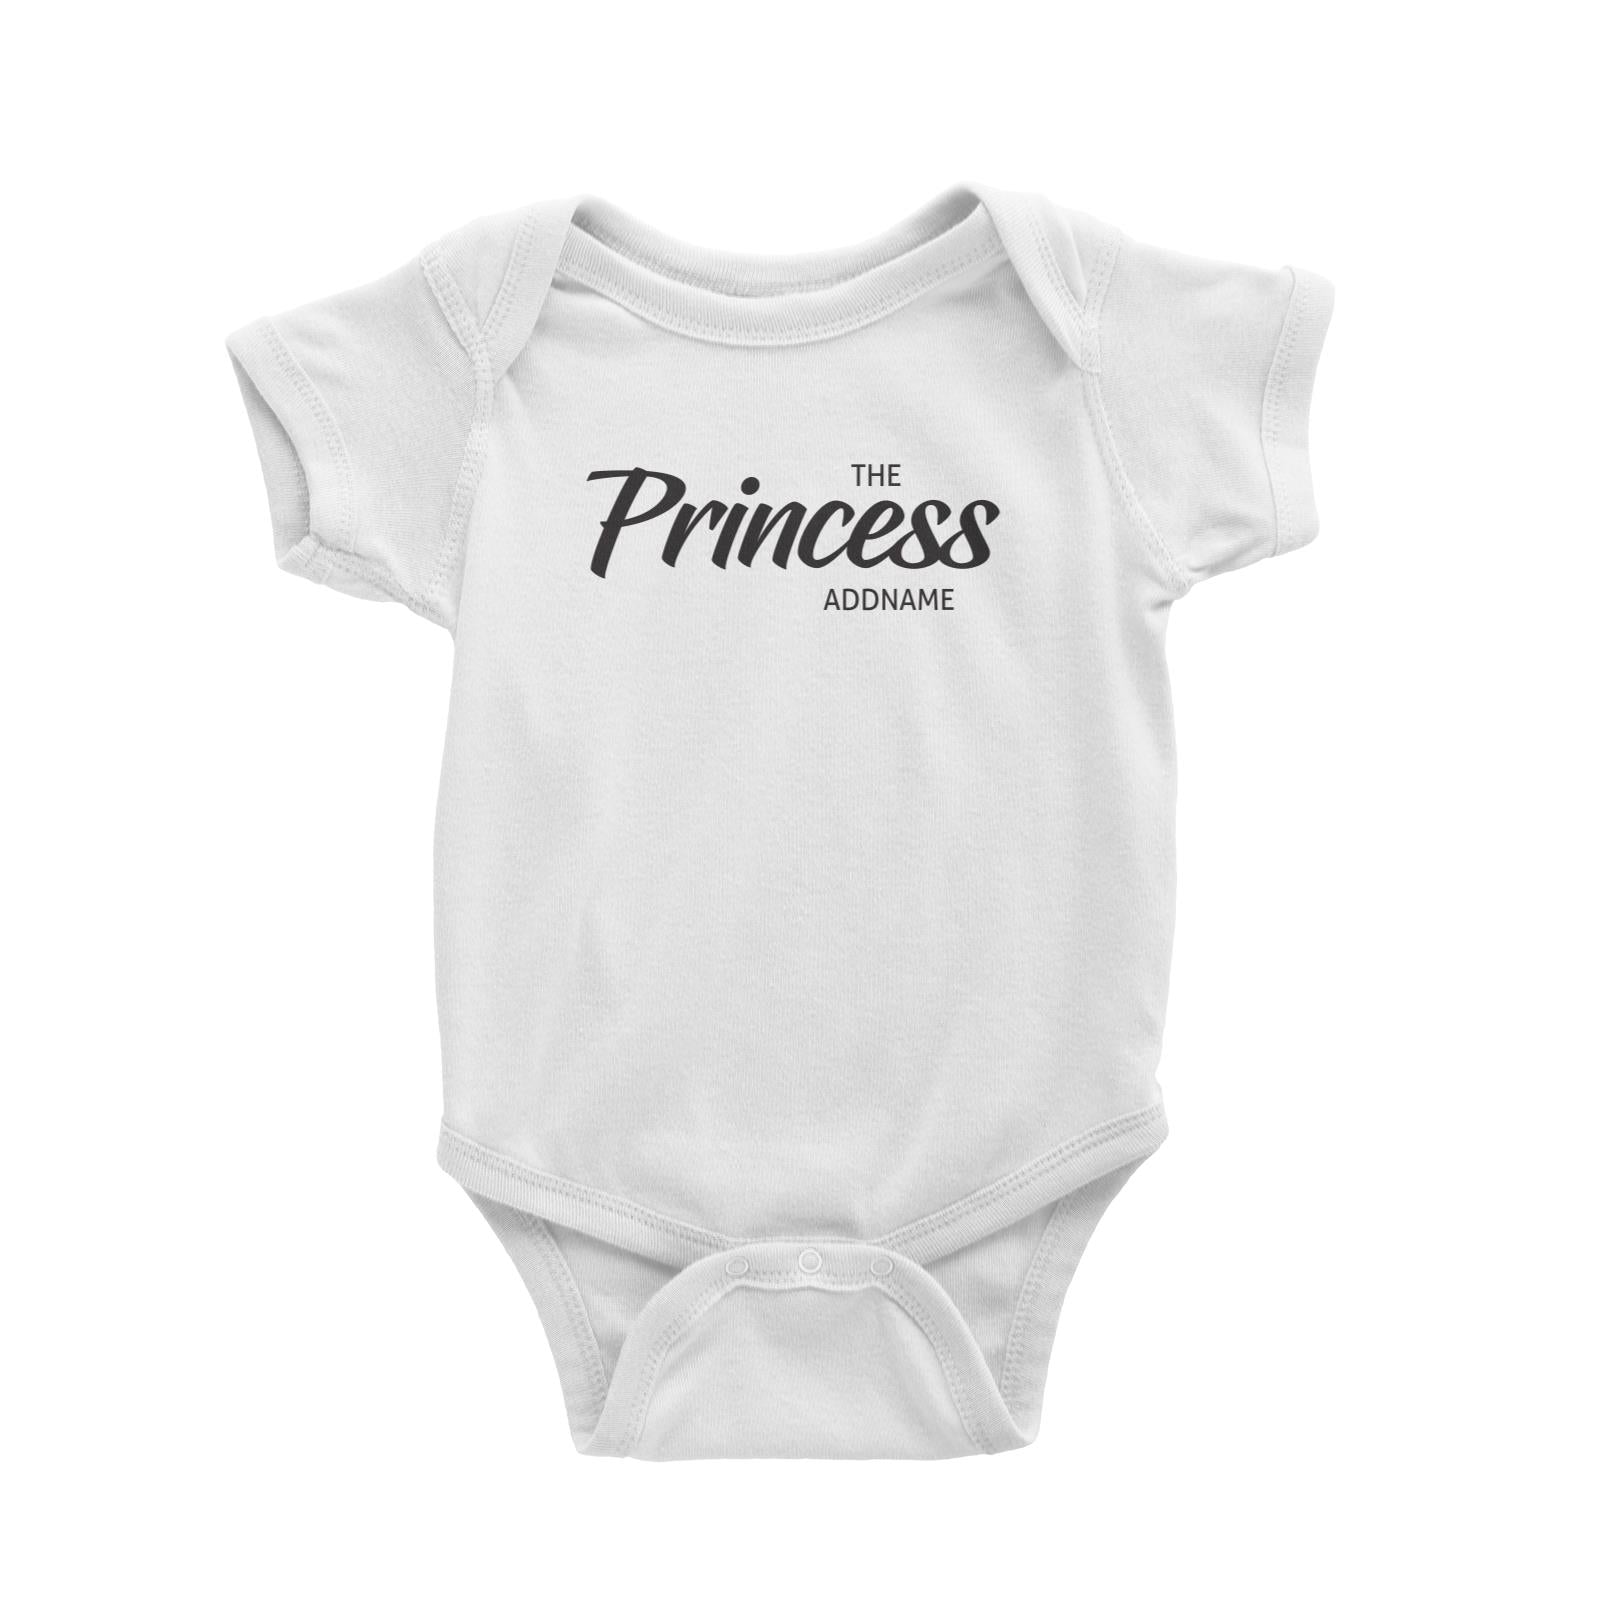 The Princess Addname (FLASH DEAL) Baby Romper Personalizable Designs Matching Family Royal Family Edition Royal Simple